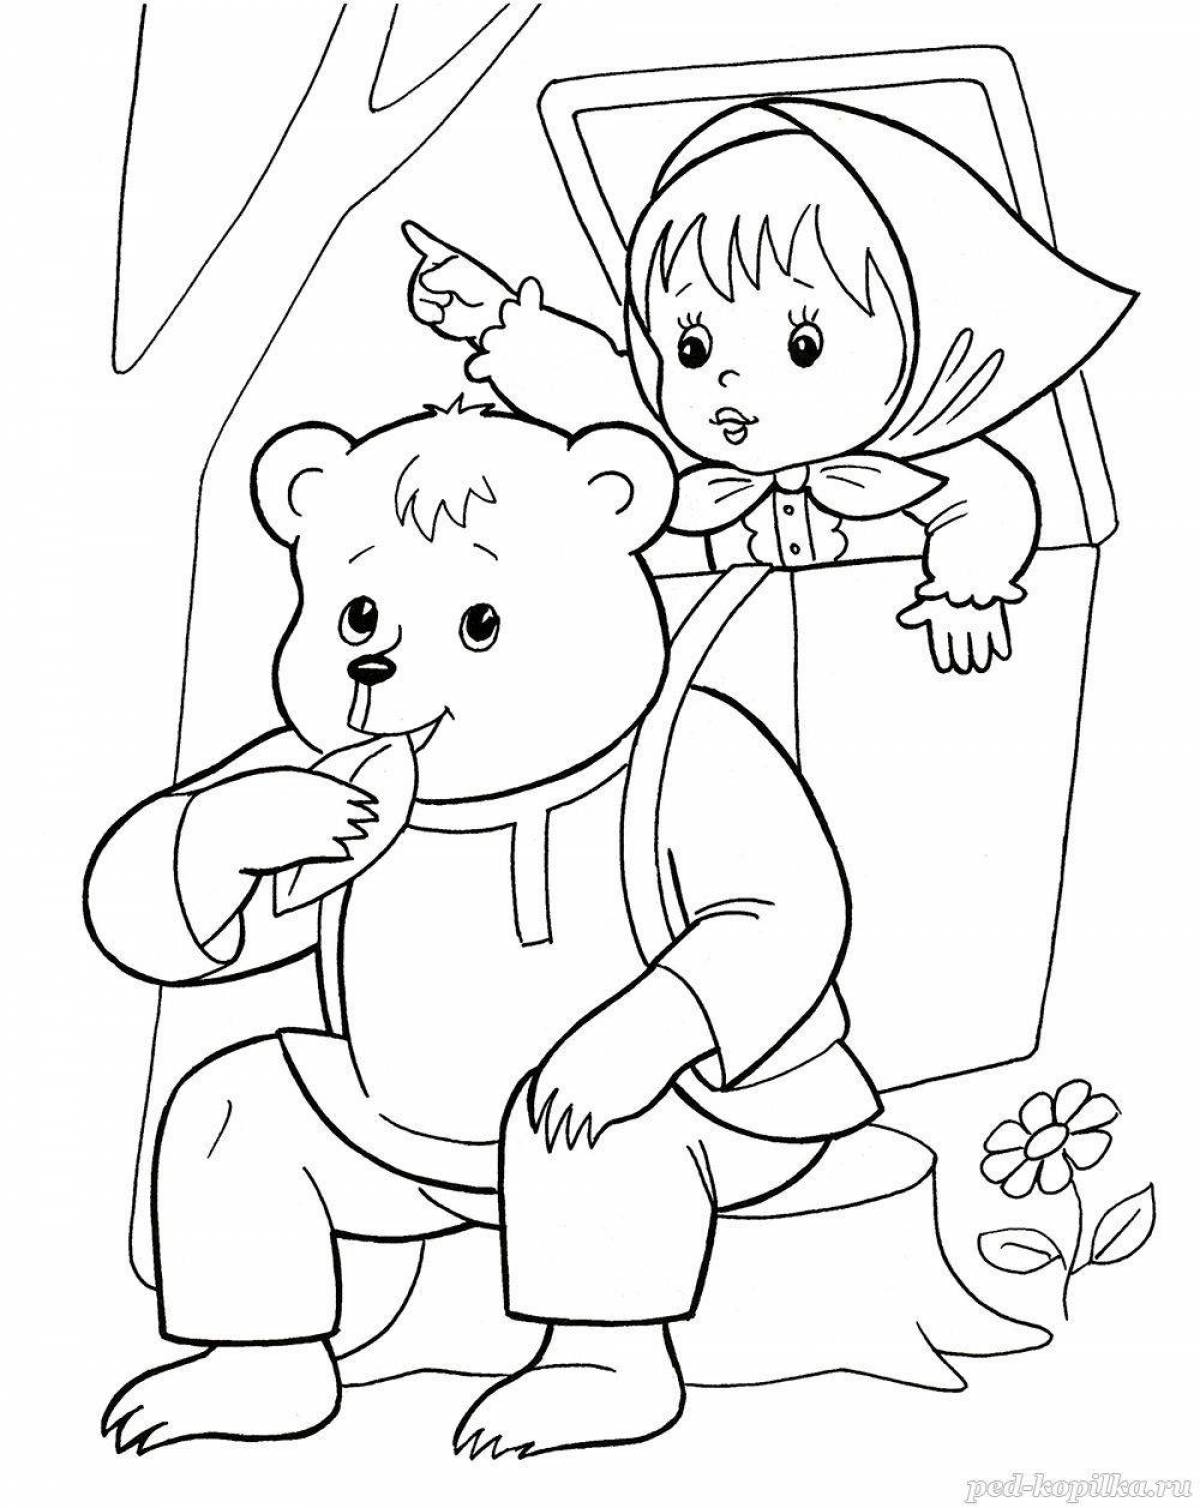 Exciting coloring book based on fairy tales